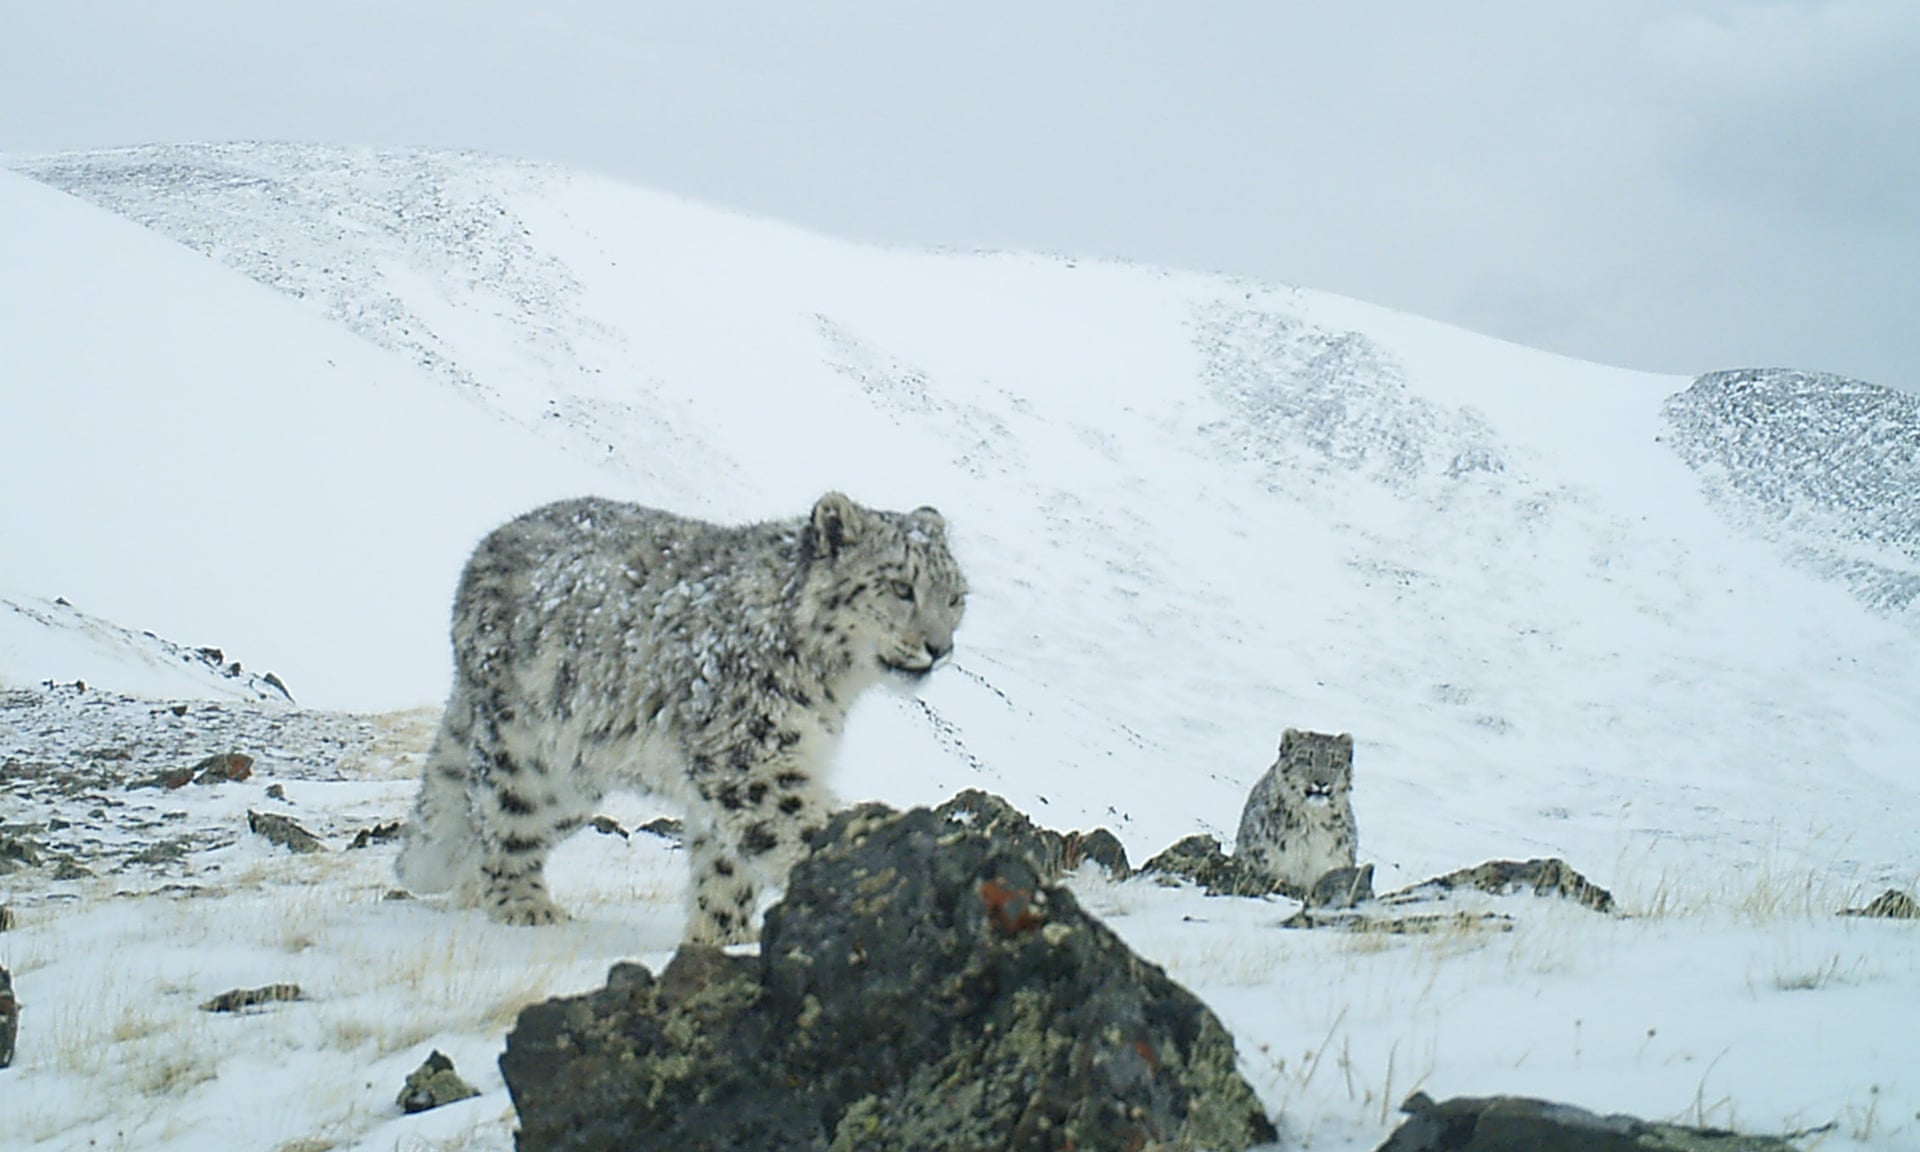 A snow leopard in Russia’s Sailyugem national park. Image Credit: Sailyugem National Park/WWF Russia.